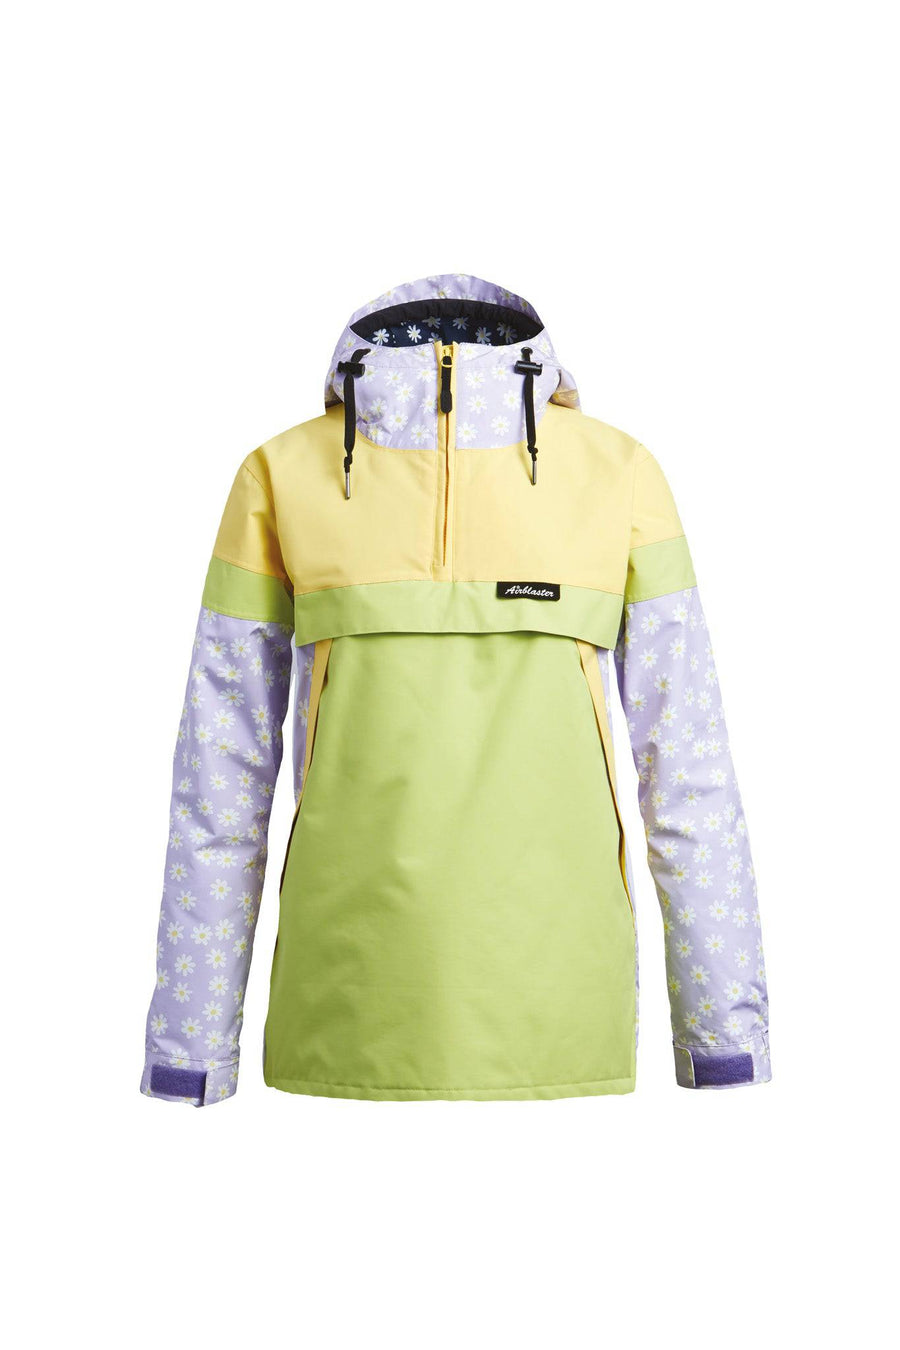 Airblaster Lady Trenchover Womens Snow Jacket in Lavender